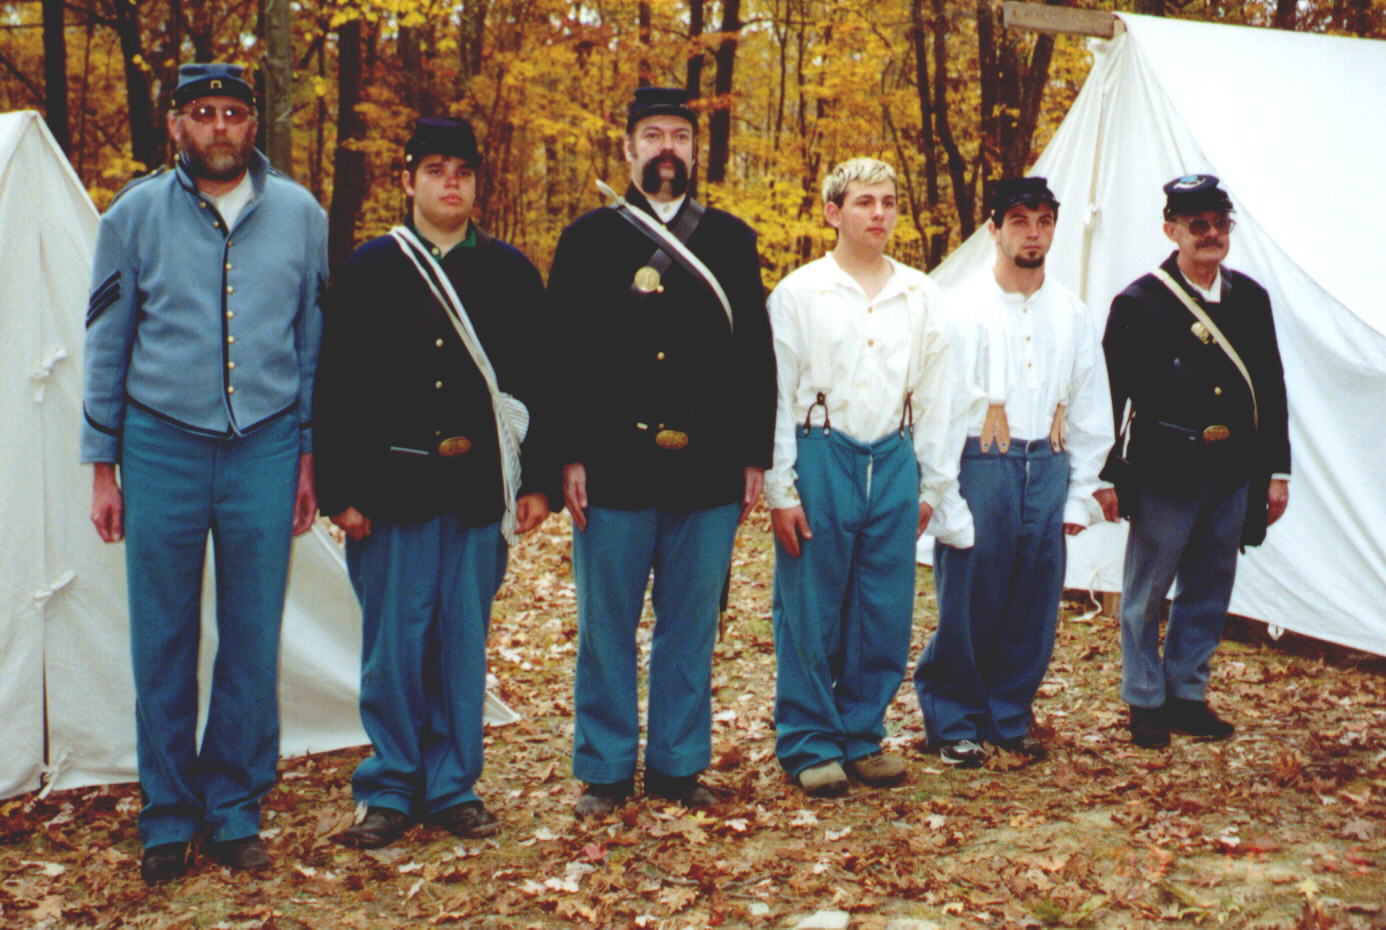 149th troops at Newtown Battlefield, October 2000